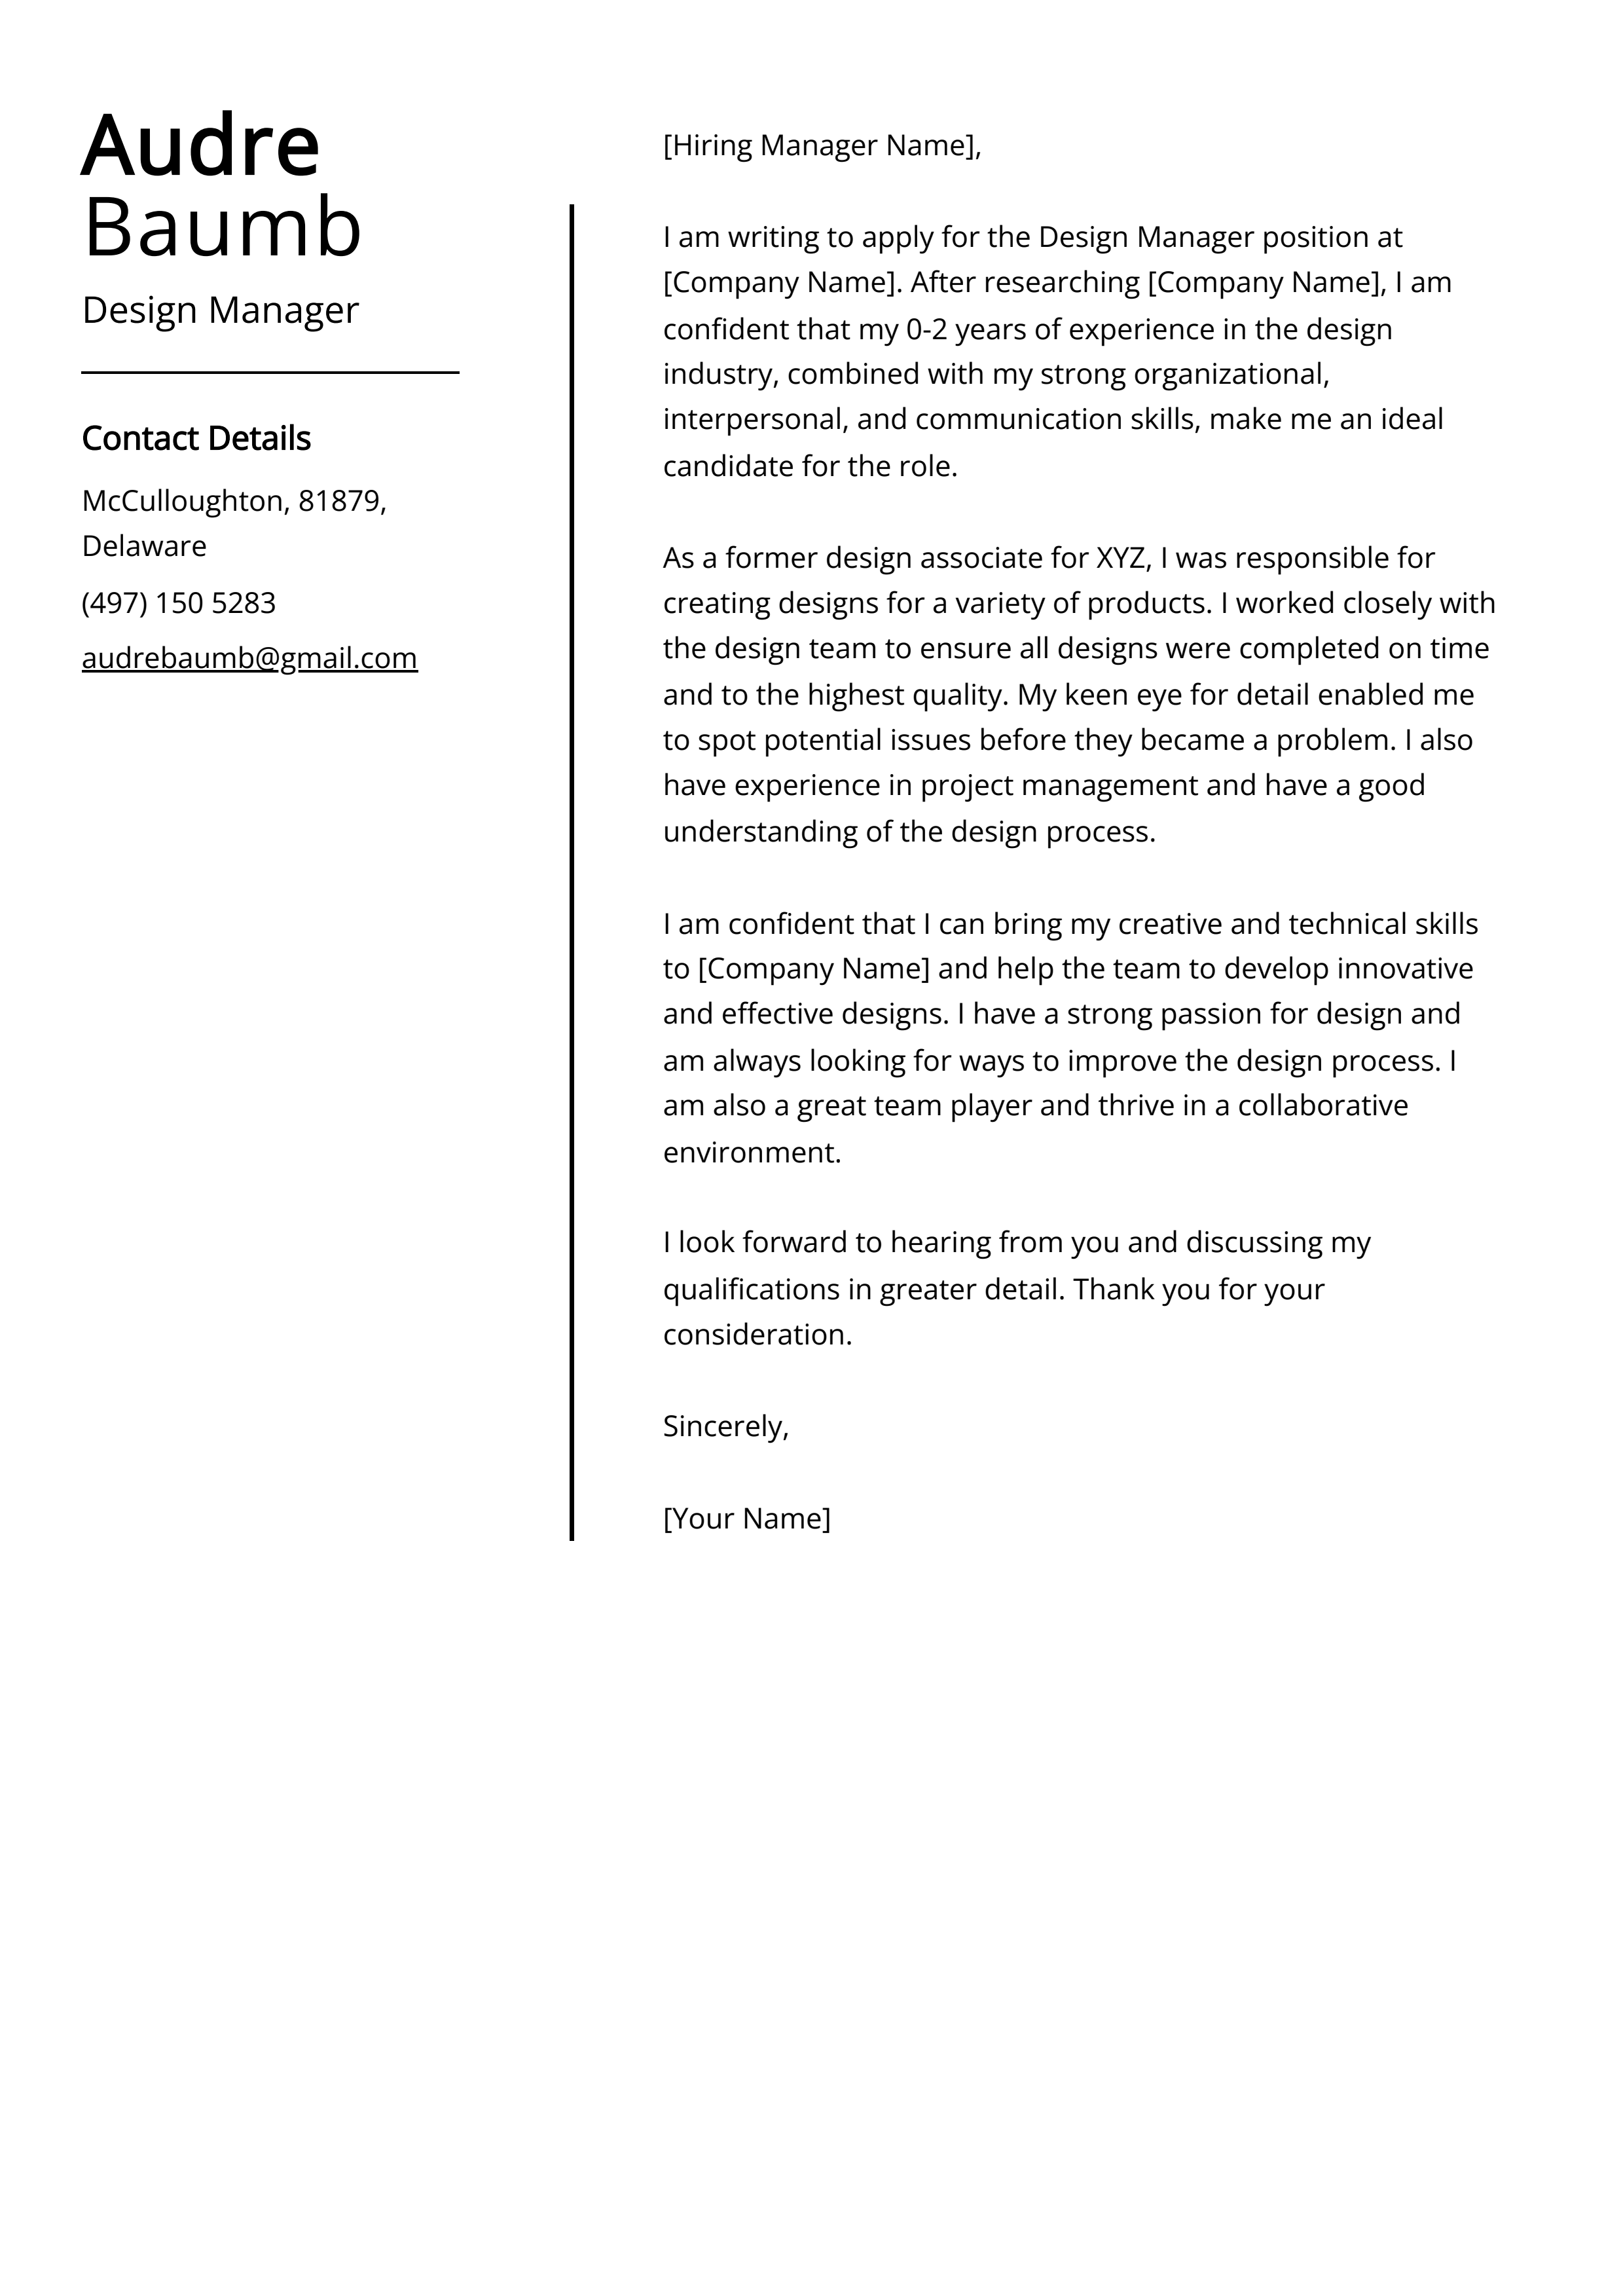 Design Manager Cover Letter Example